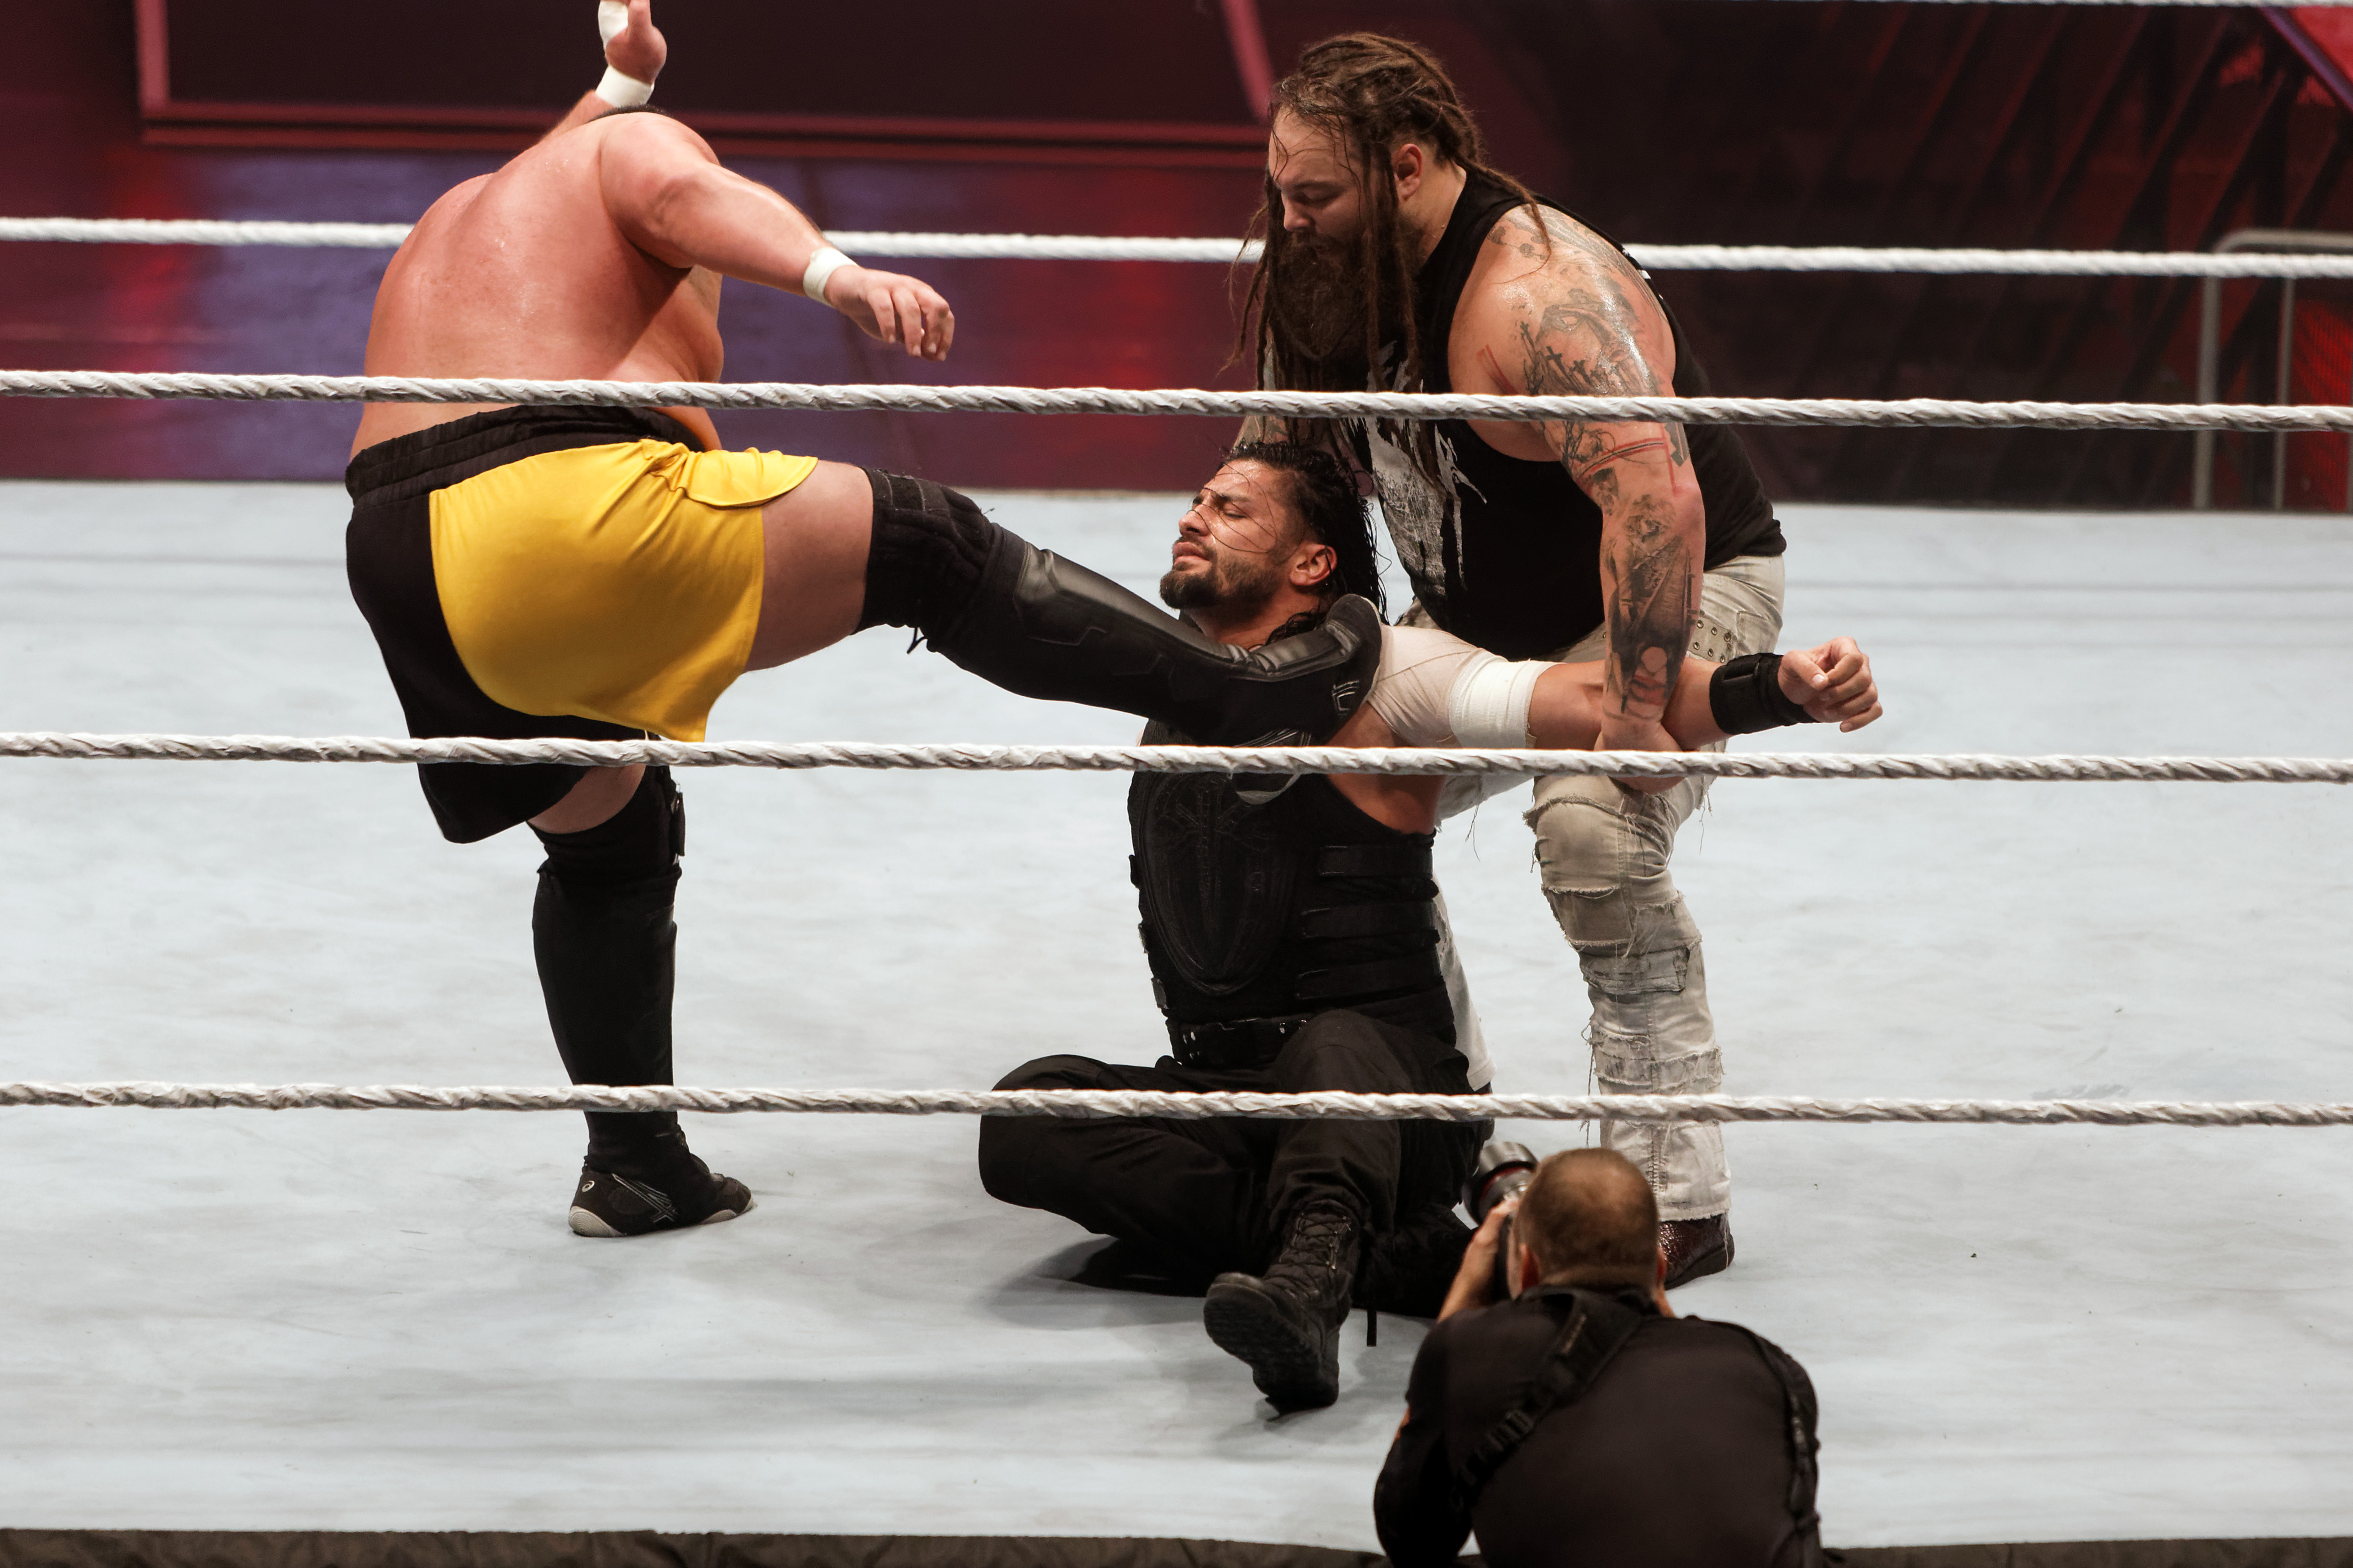 LILLE, FRANCE - MAY 09: Roman Reigns (C) fights against Bray and Samoa Joe during WWE Live 2017 at Zenith Arena on May 9, 2017 in Lille, France. (Photo by Sylvain Lefevre/Getty Images)